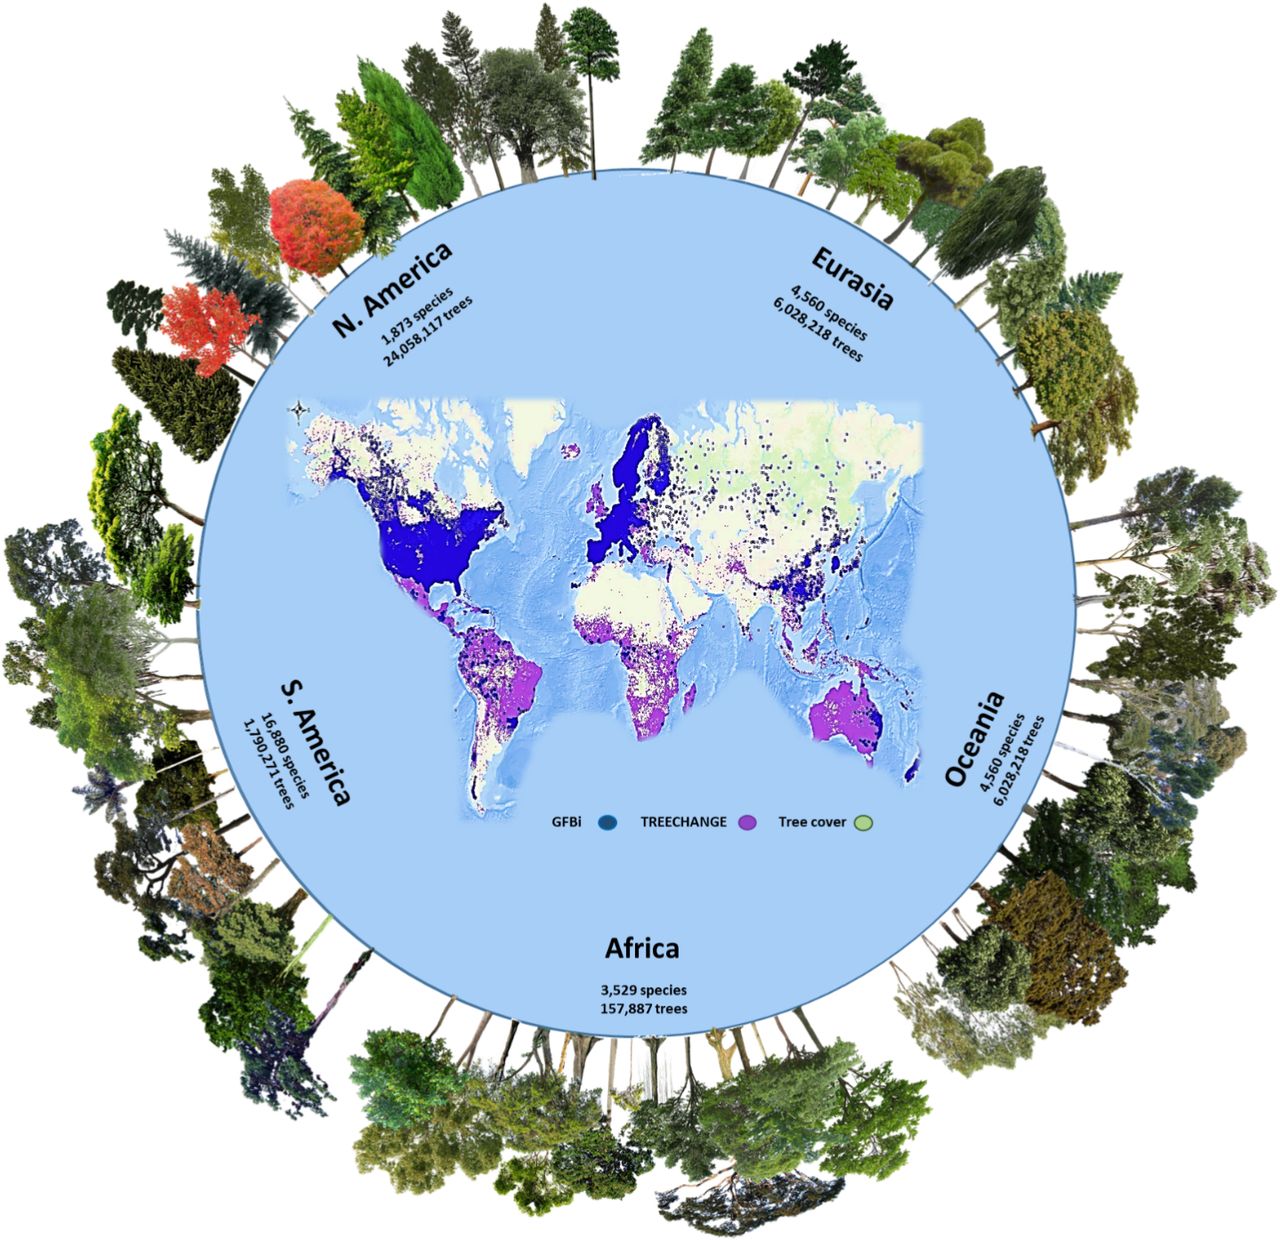 GFBI data were merged with TREECHANGE data to provide the estimates in the new study. Green areas represent the global tree cover. The GFBI database contains records of about 38 million trees from 28,192 species. Depicted here are some of the most frequent species recorded in each continent. Image credit: Cazzolla Gatti et al. in PNAS, 2022